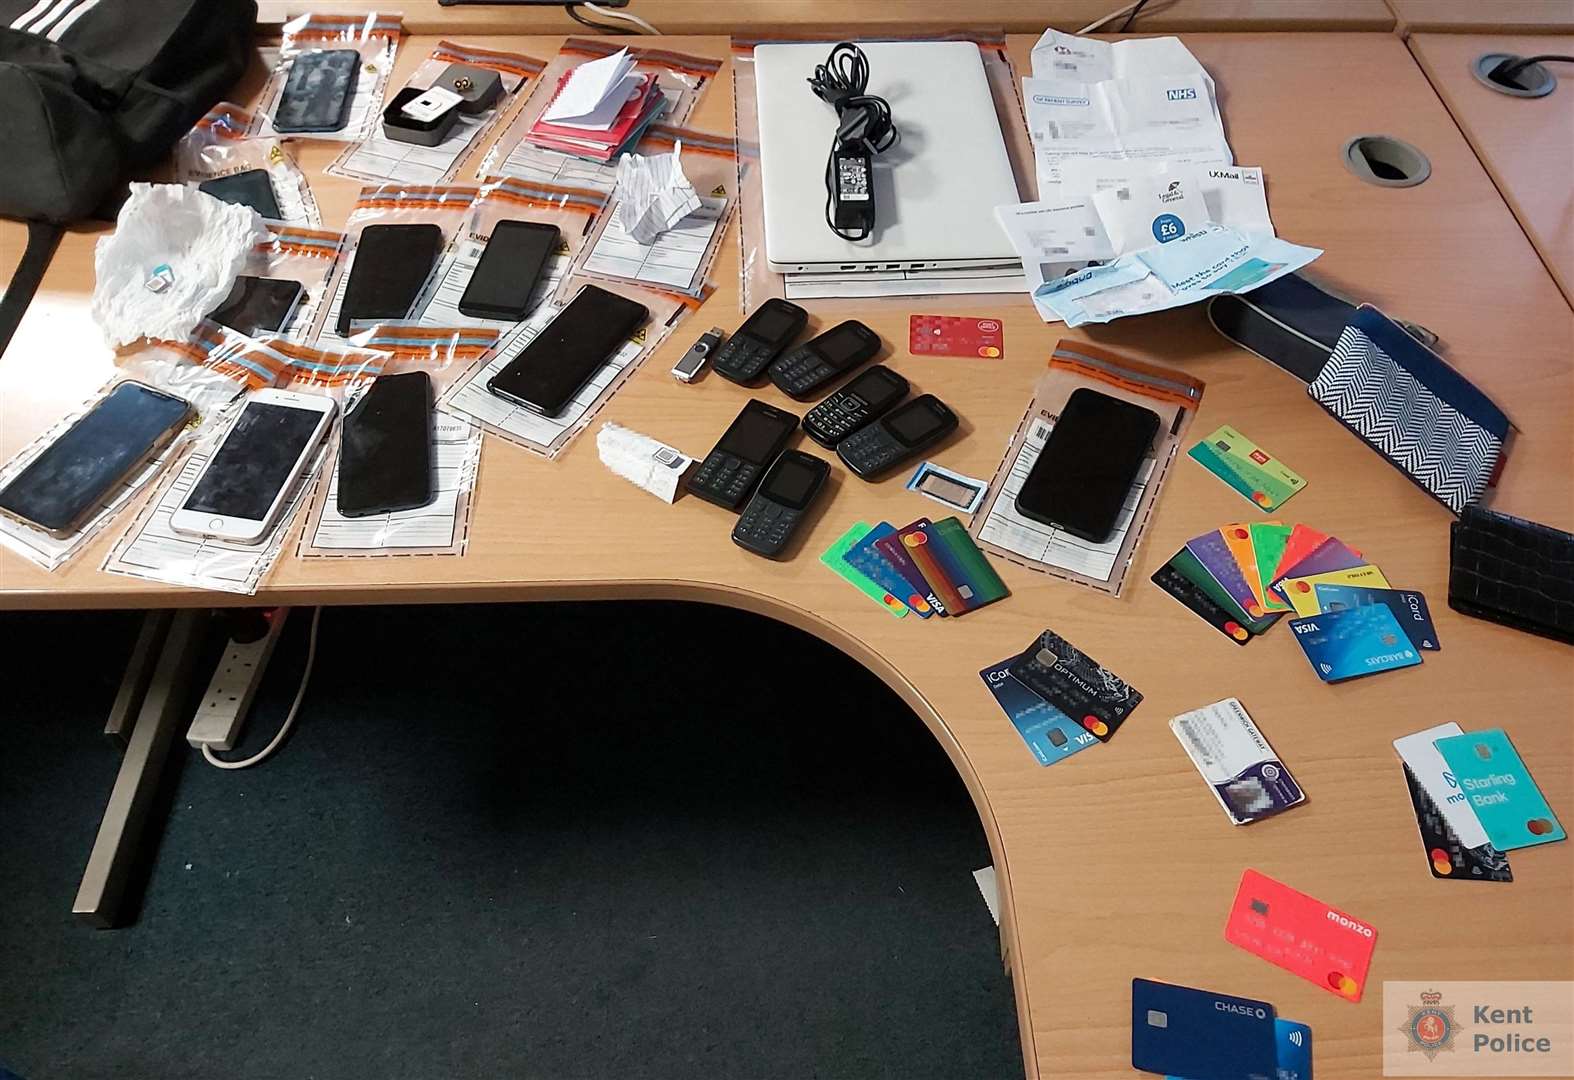 Cards and phones seized on site. Picture: Kent Police